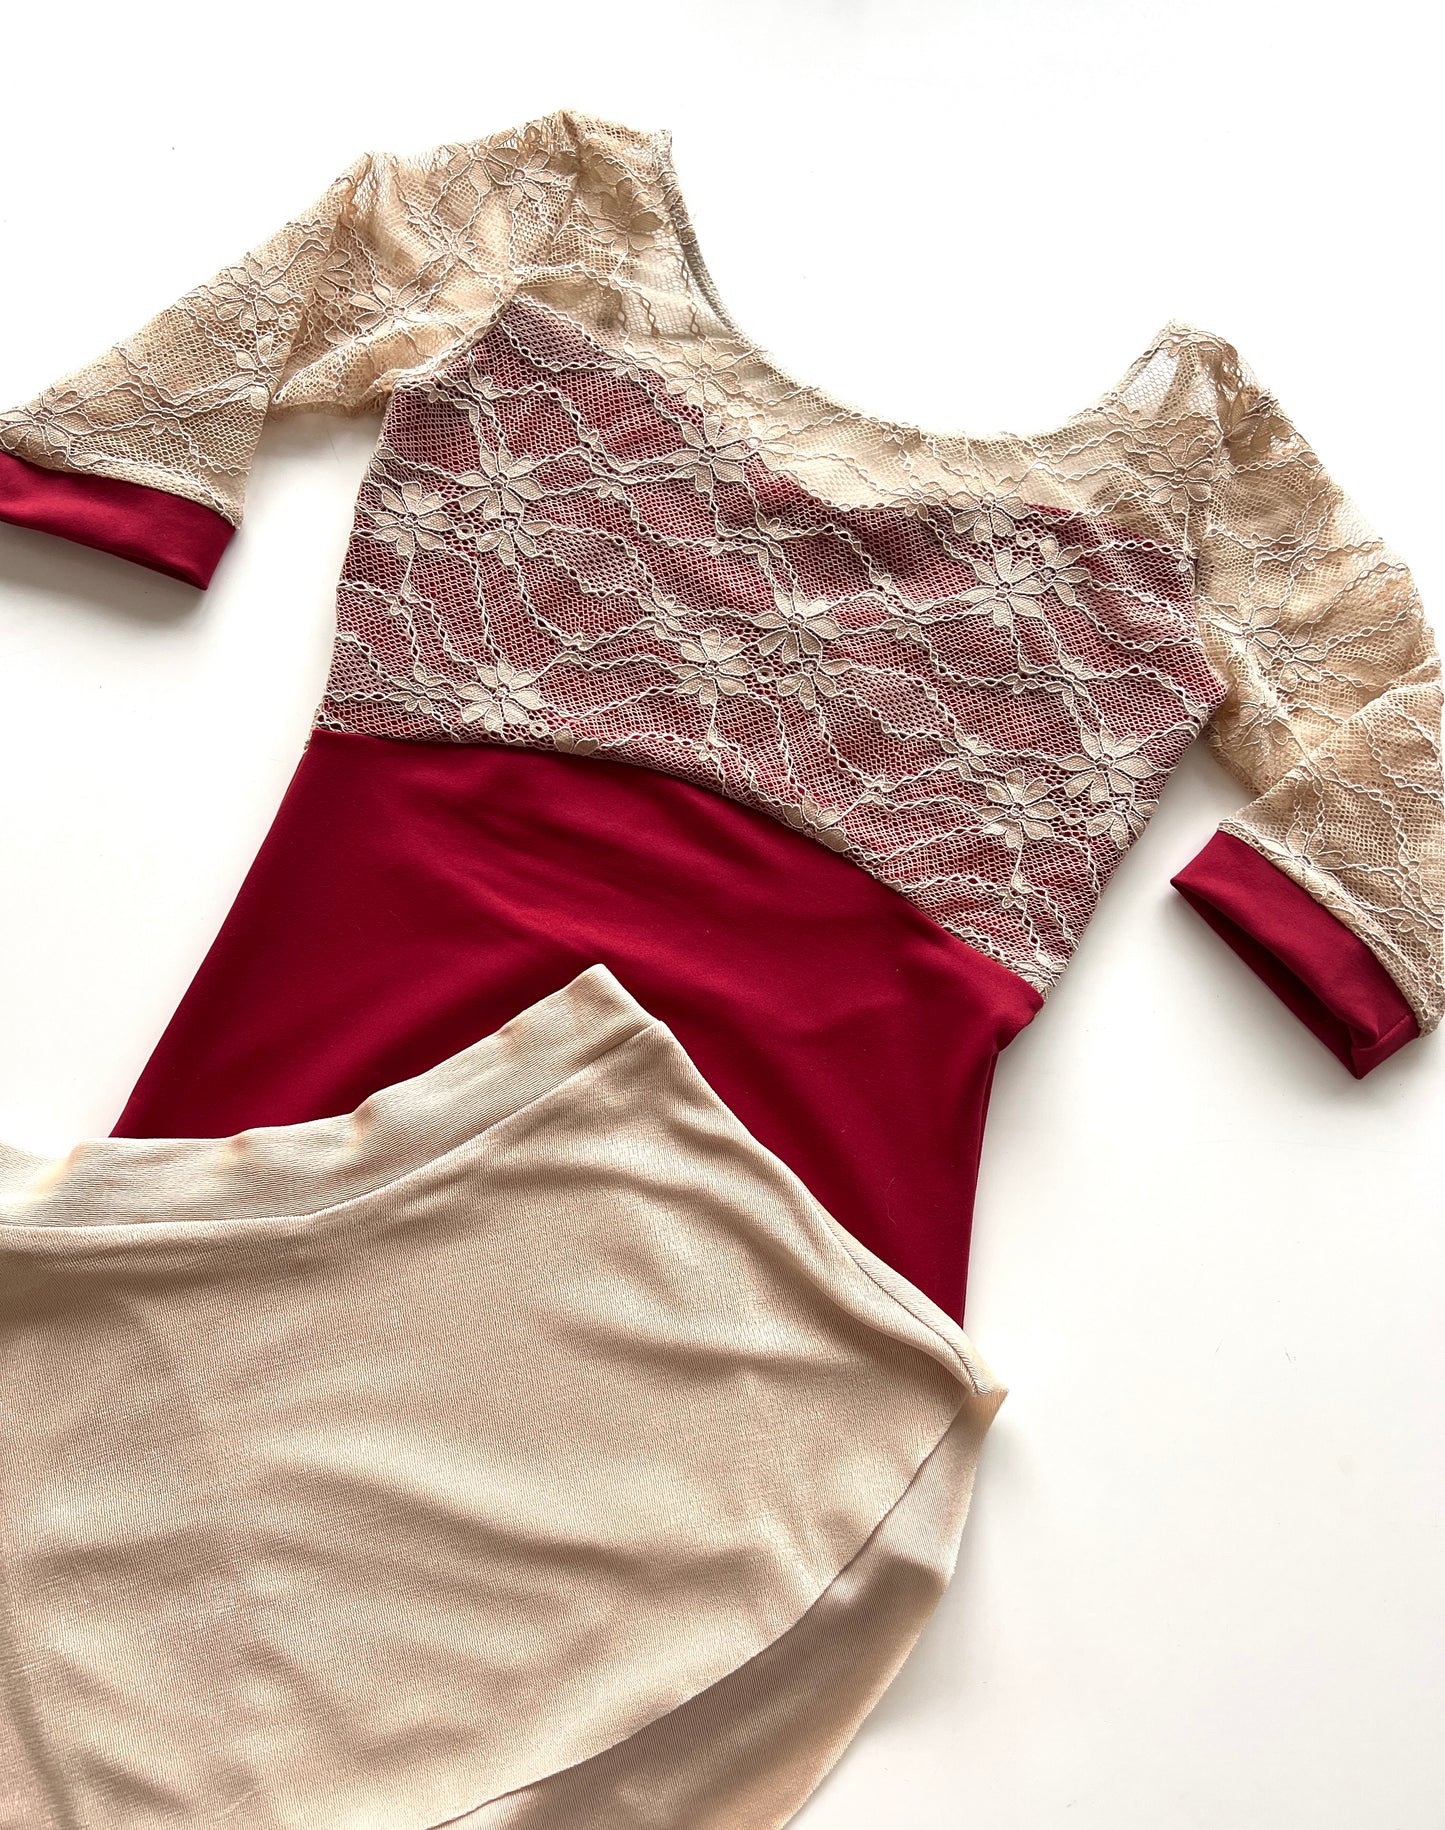 Lace sleeve leotard in red  with  Bullet Pointe Skirt in Drift from The Collective Dancewear